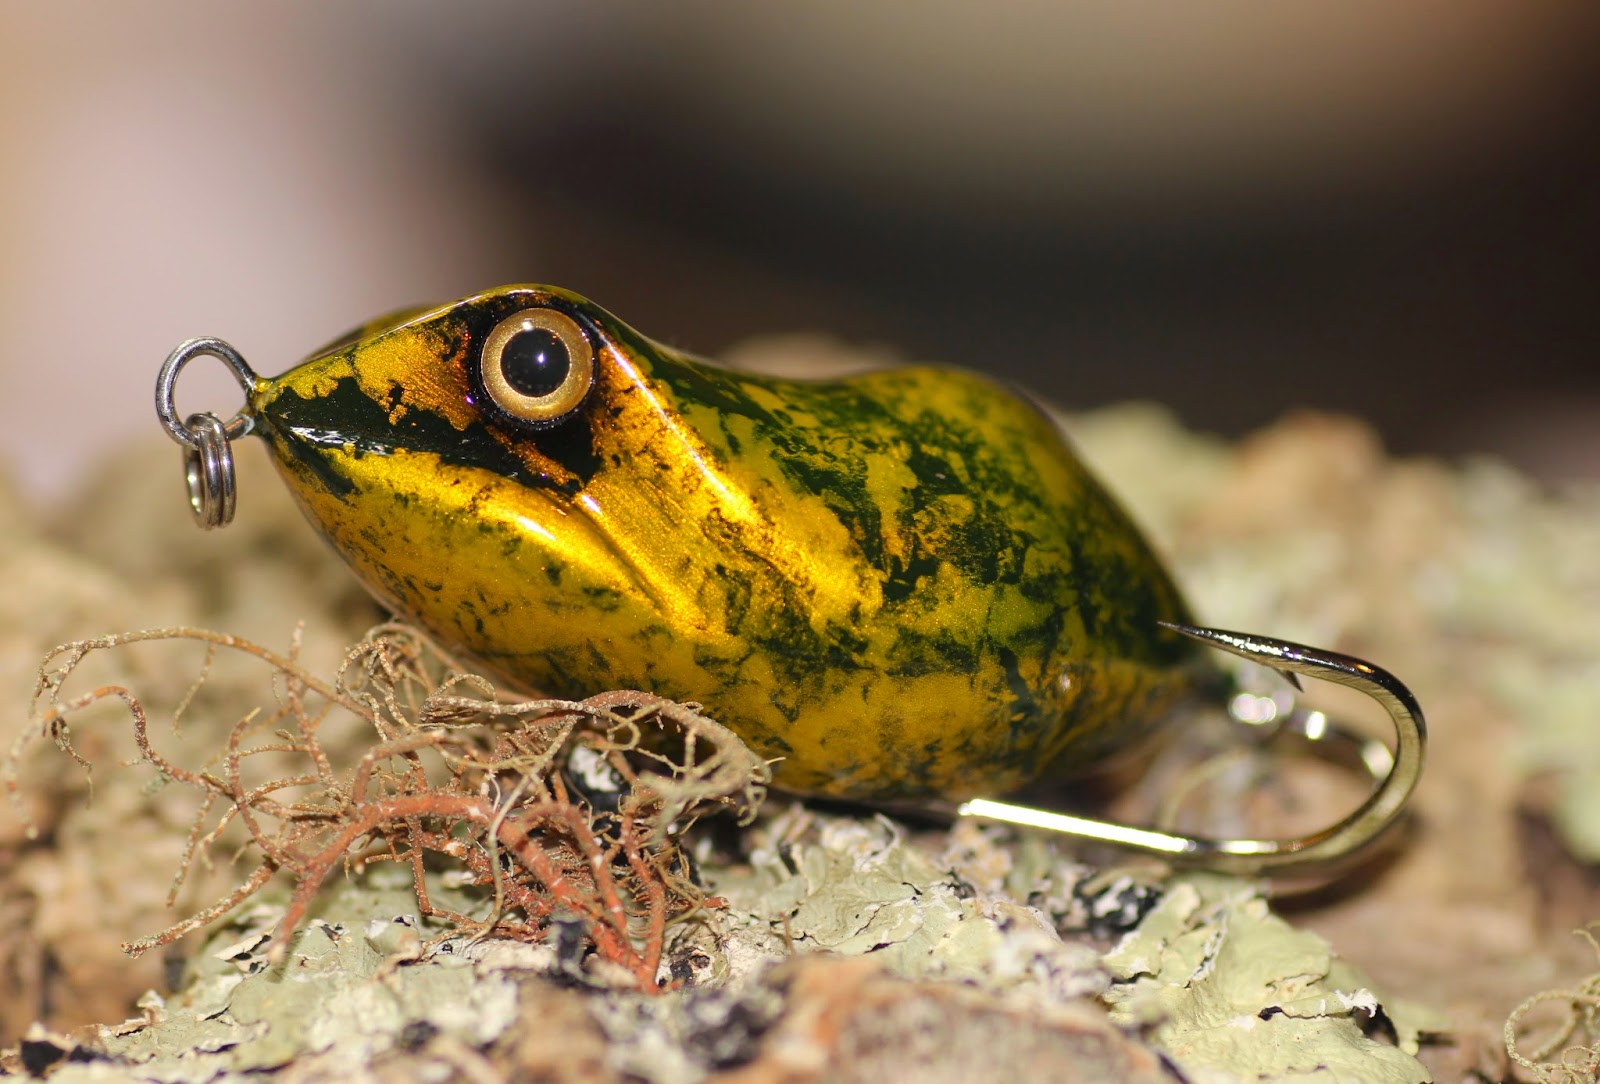 Bass Junkies Frog Pond: AR Lures - AR Frog Review